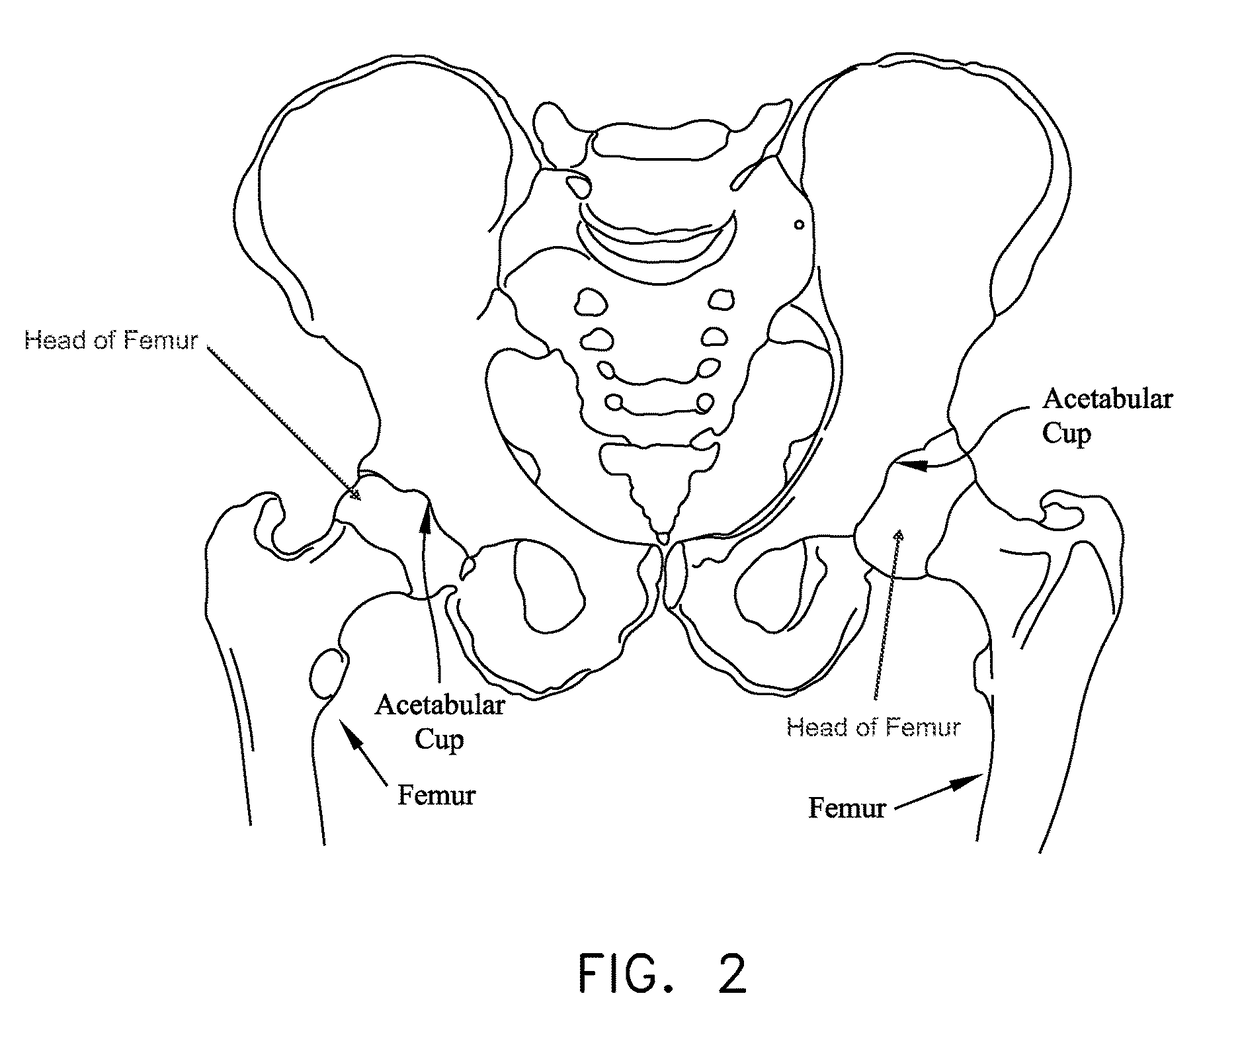 Method and apparatus for reconstructing a hip joint, including the provision and use of a novel arthroscopic debridement template for assisting in the treatment of cam-type femoroacetabular impingement